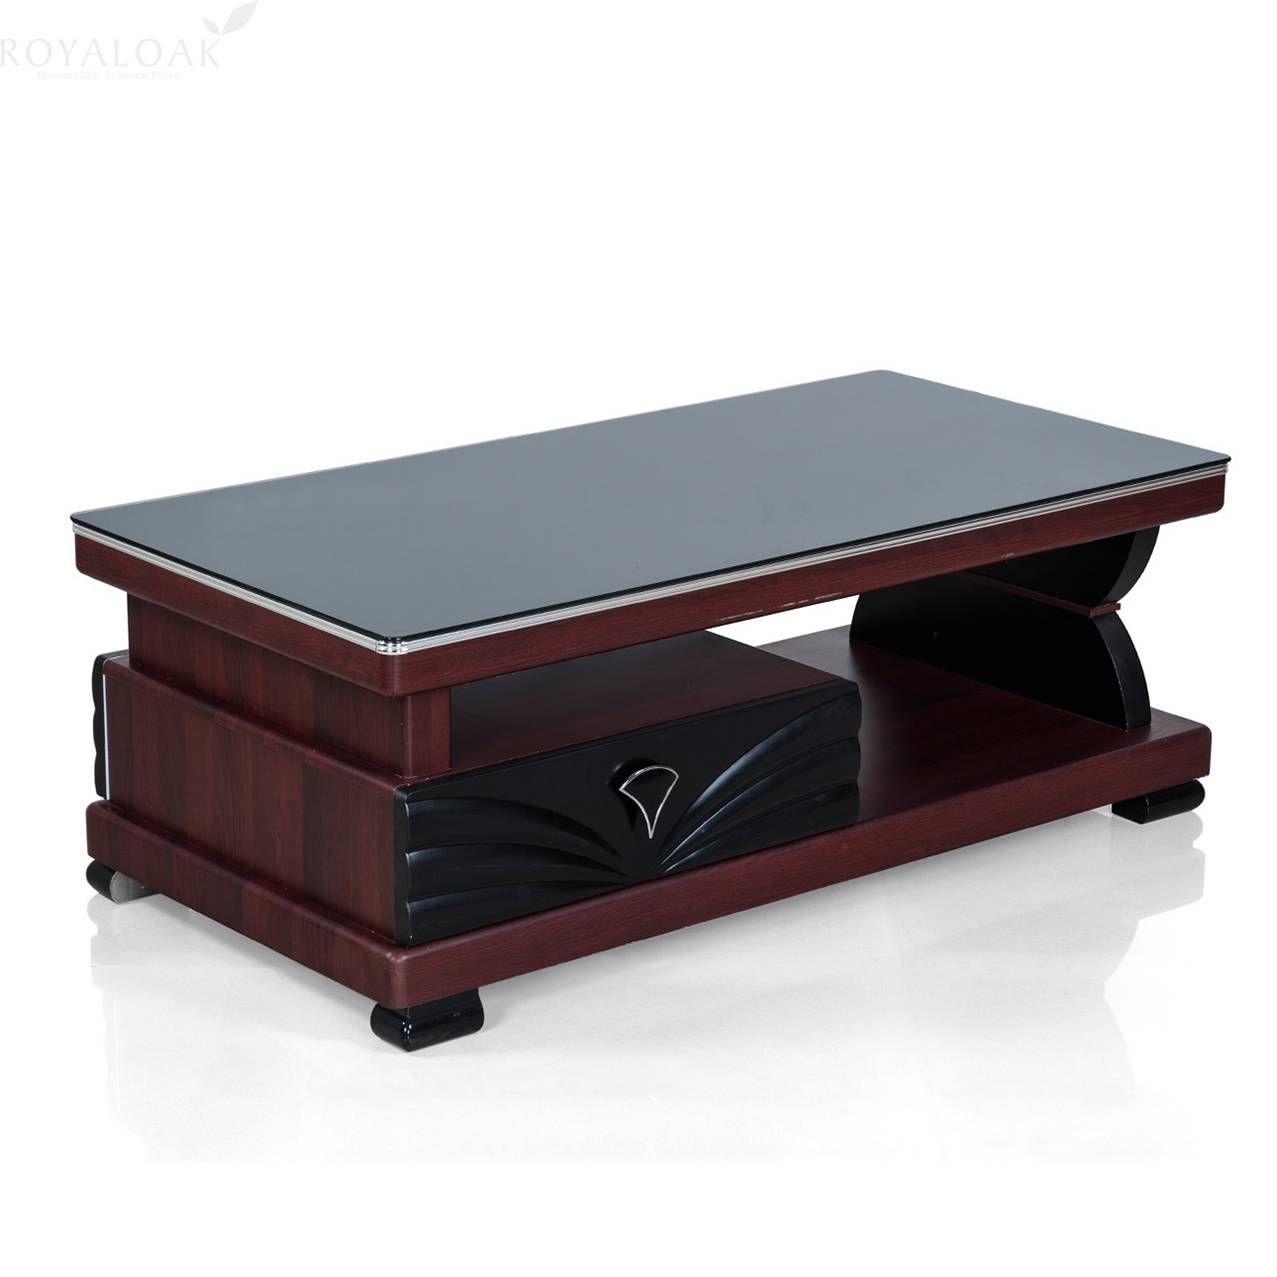 Buy Royaloak Wave Coffee Tableonline In India – Living In Oak Coffee Table With Glass Top (View 13 of 15)